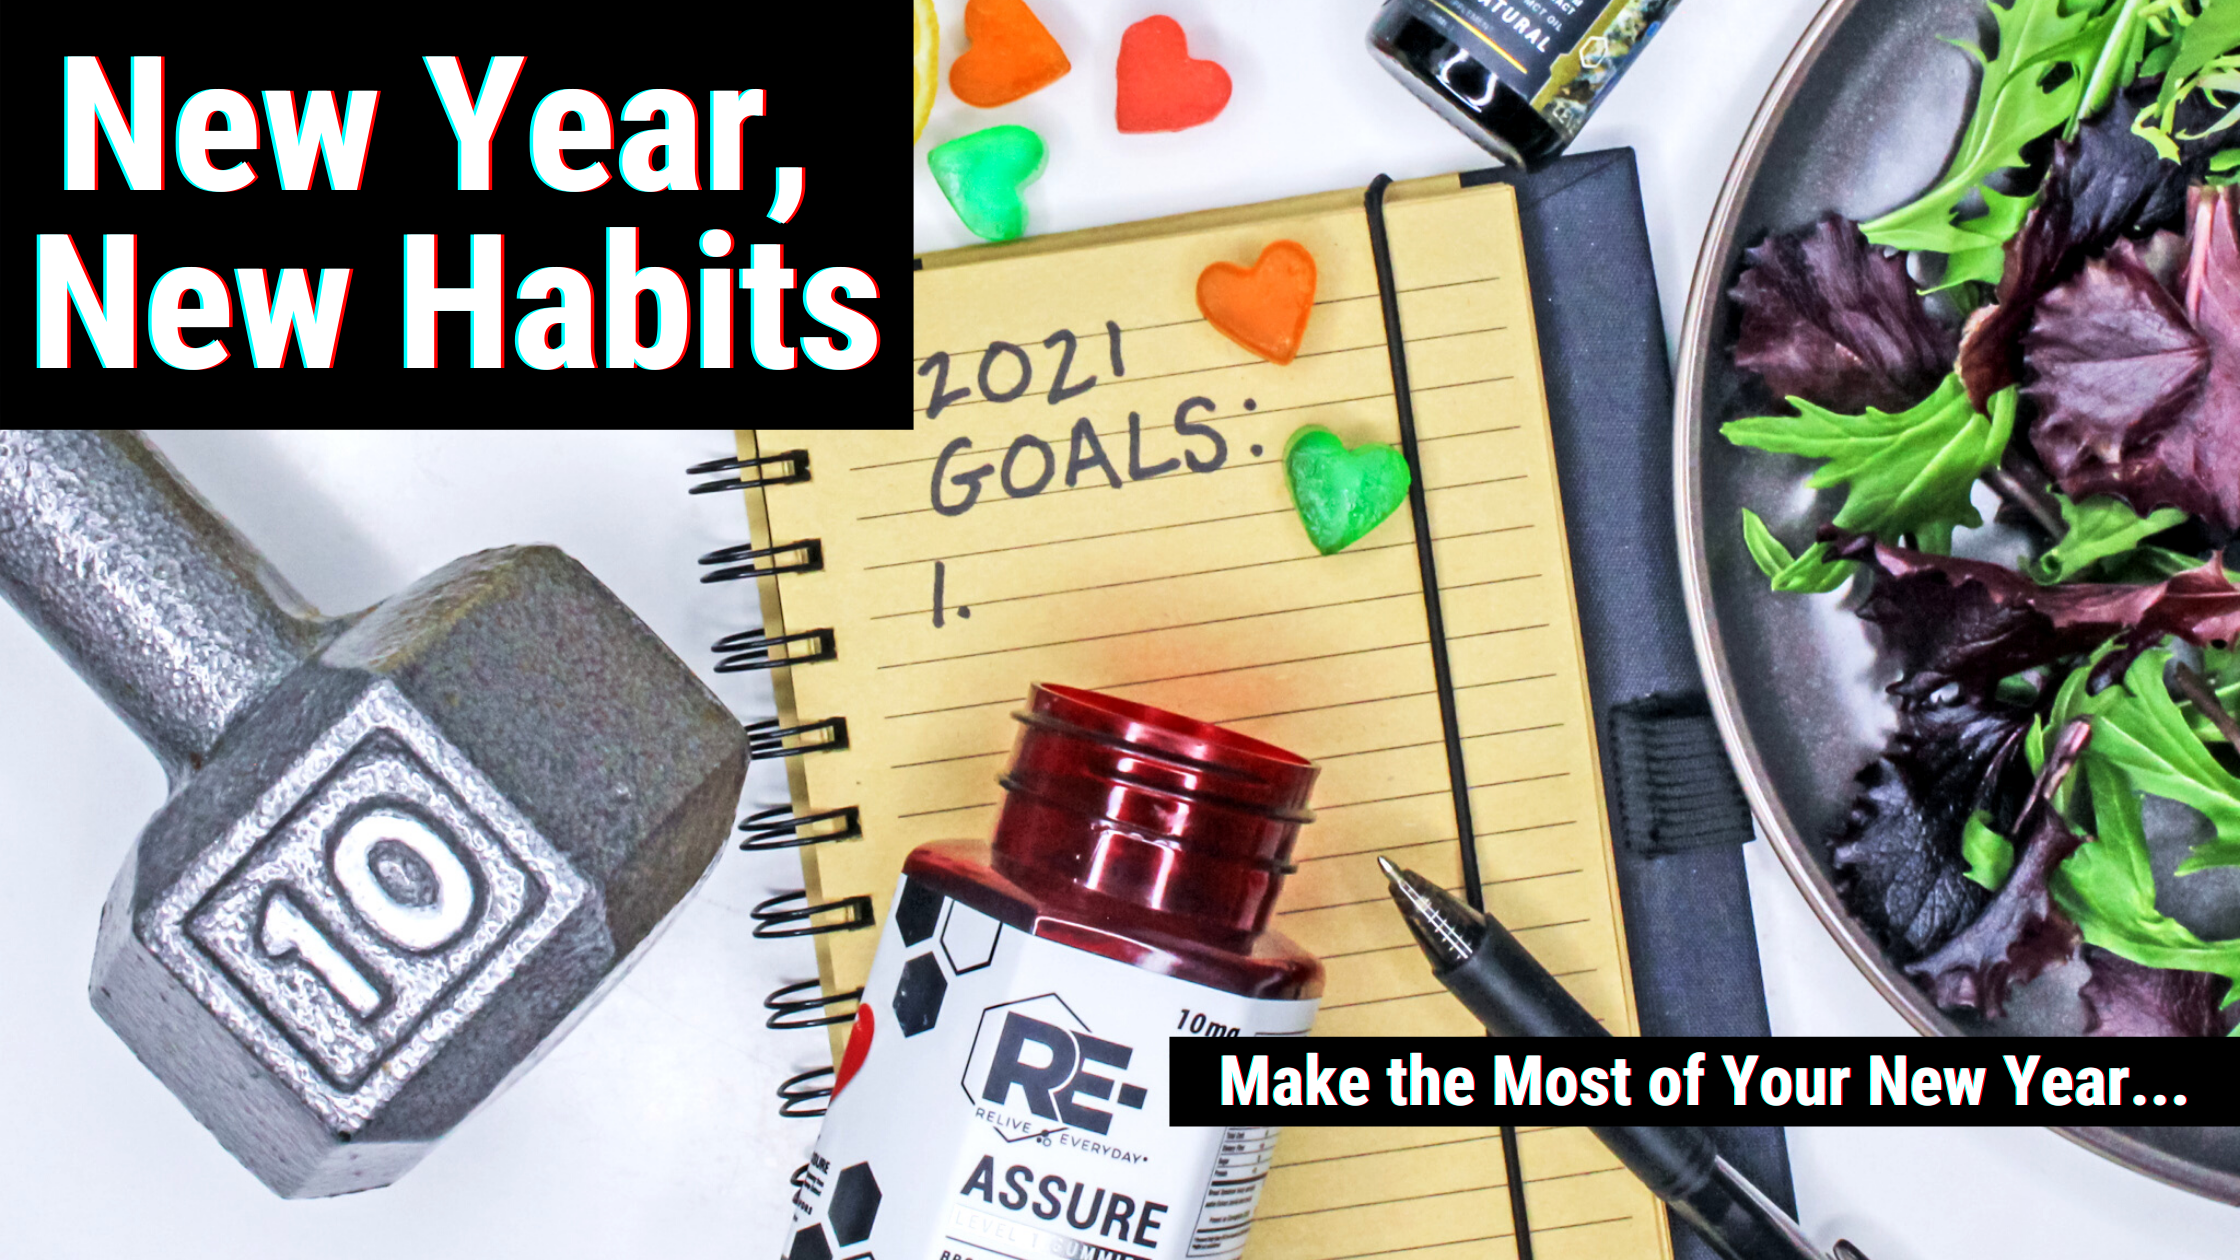 5 Healthy Habits to Make The Most of The New Year 1